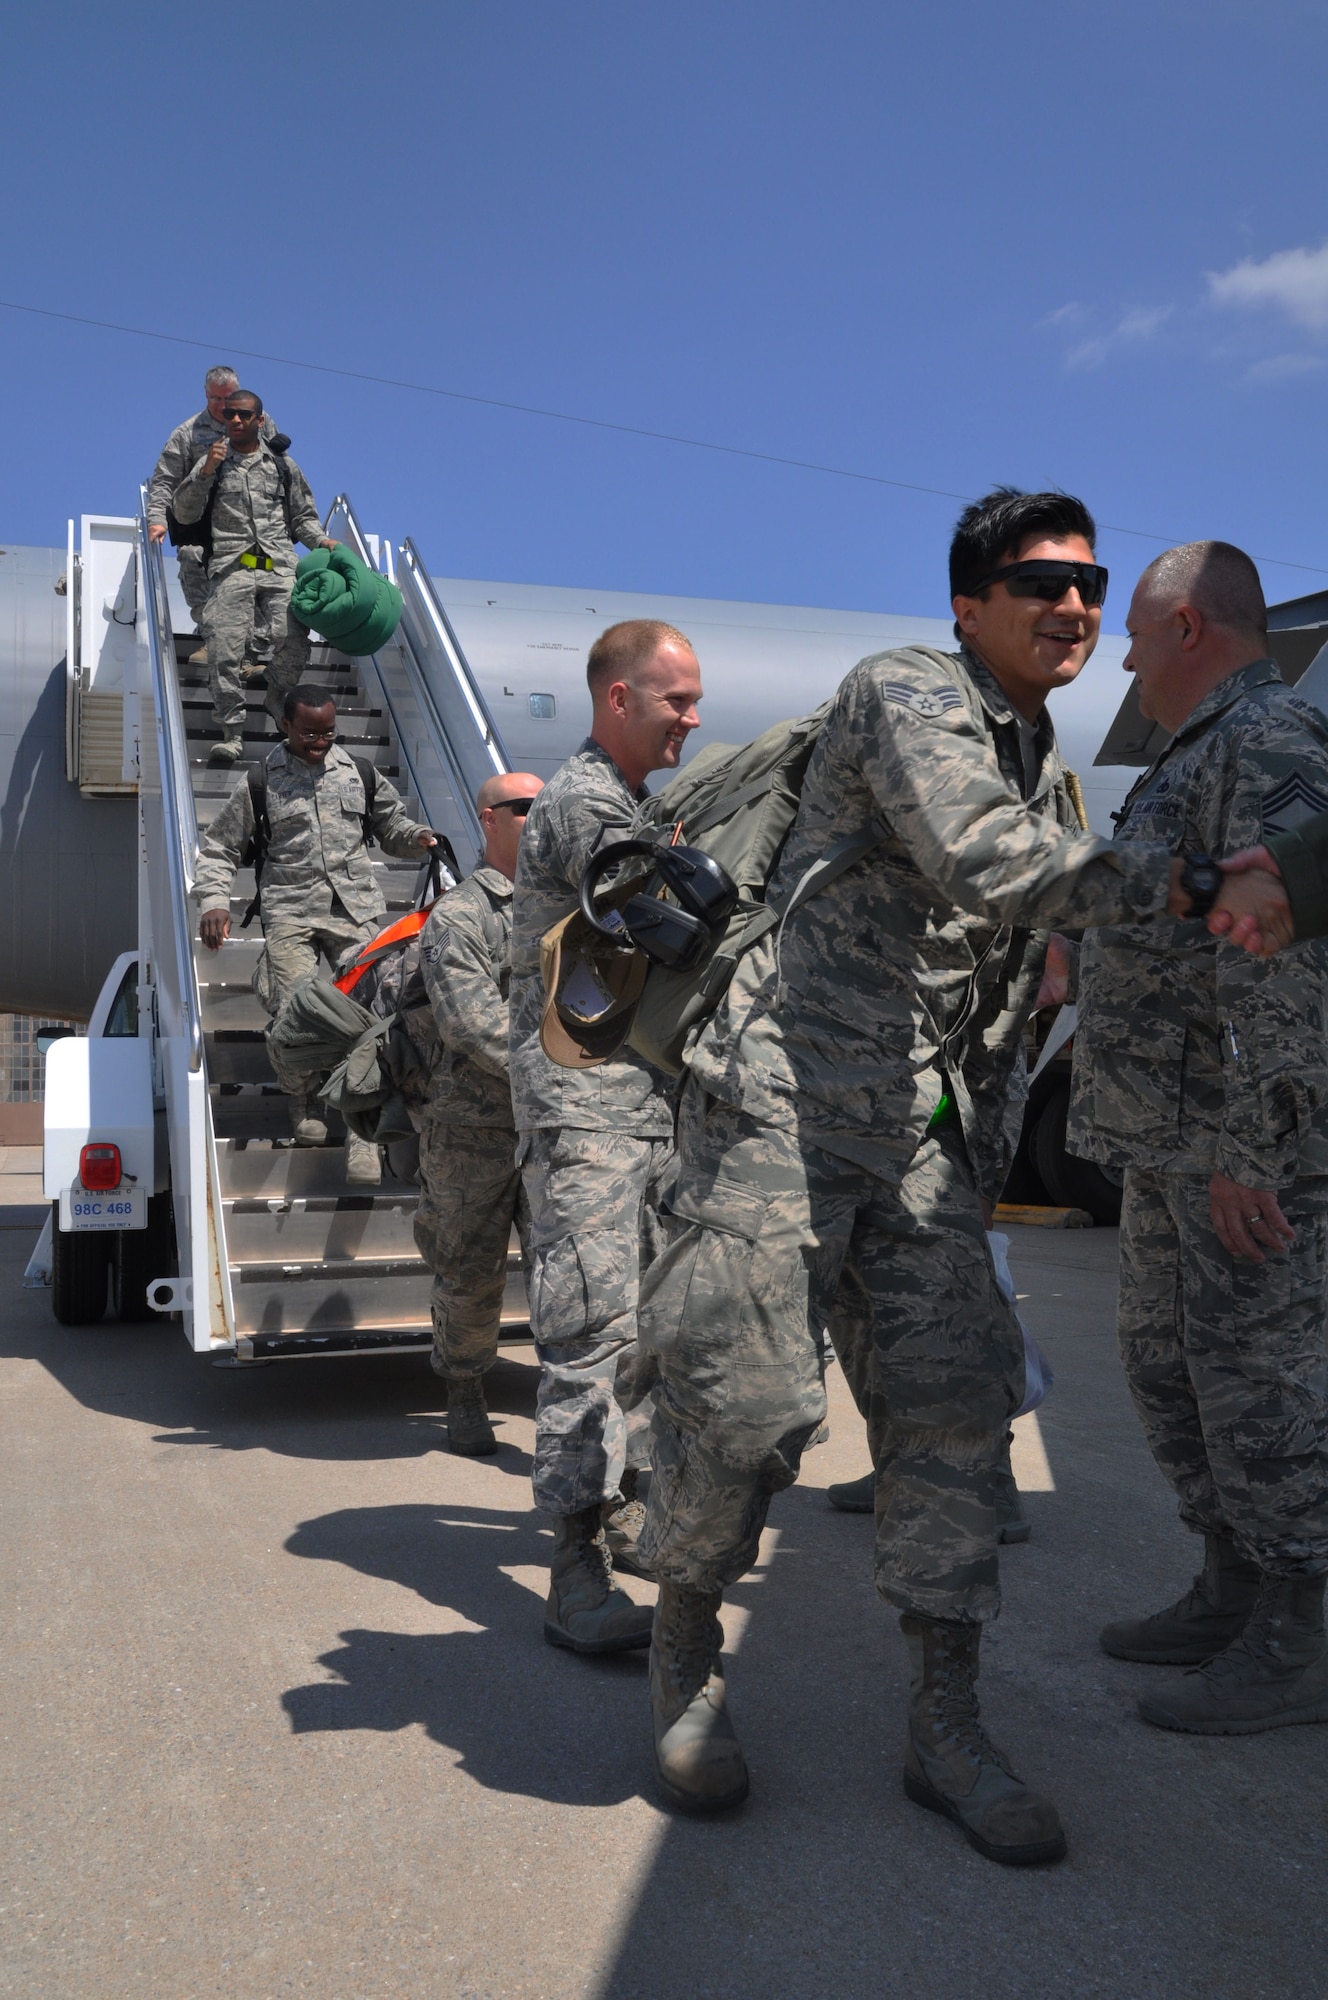 More than 15 members of the 931st Air Refueling Group are greeted by leadership as they step of a KC-135 Stratotanker April 16, 2015, at McConnell Air Force Base, Kan.  The Airmen had just returned from a deployment to Southwest Asia, where they provided support to the 379th Air Expeditionary Wing. (U.S. Air Force photo by Tech. Sgt. Abigail Klein)